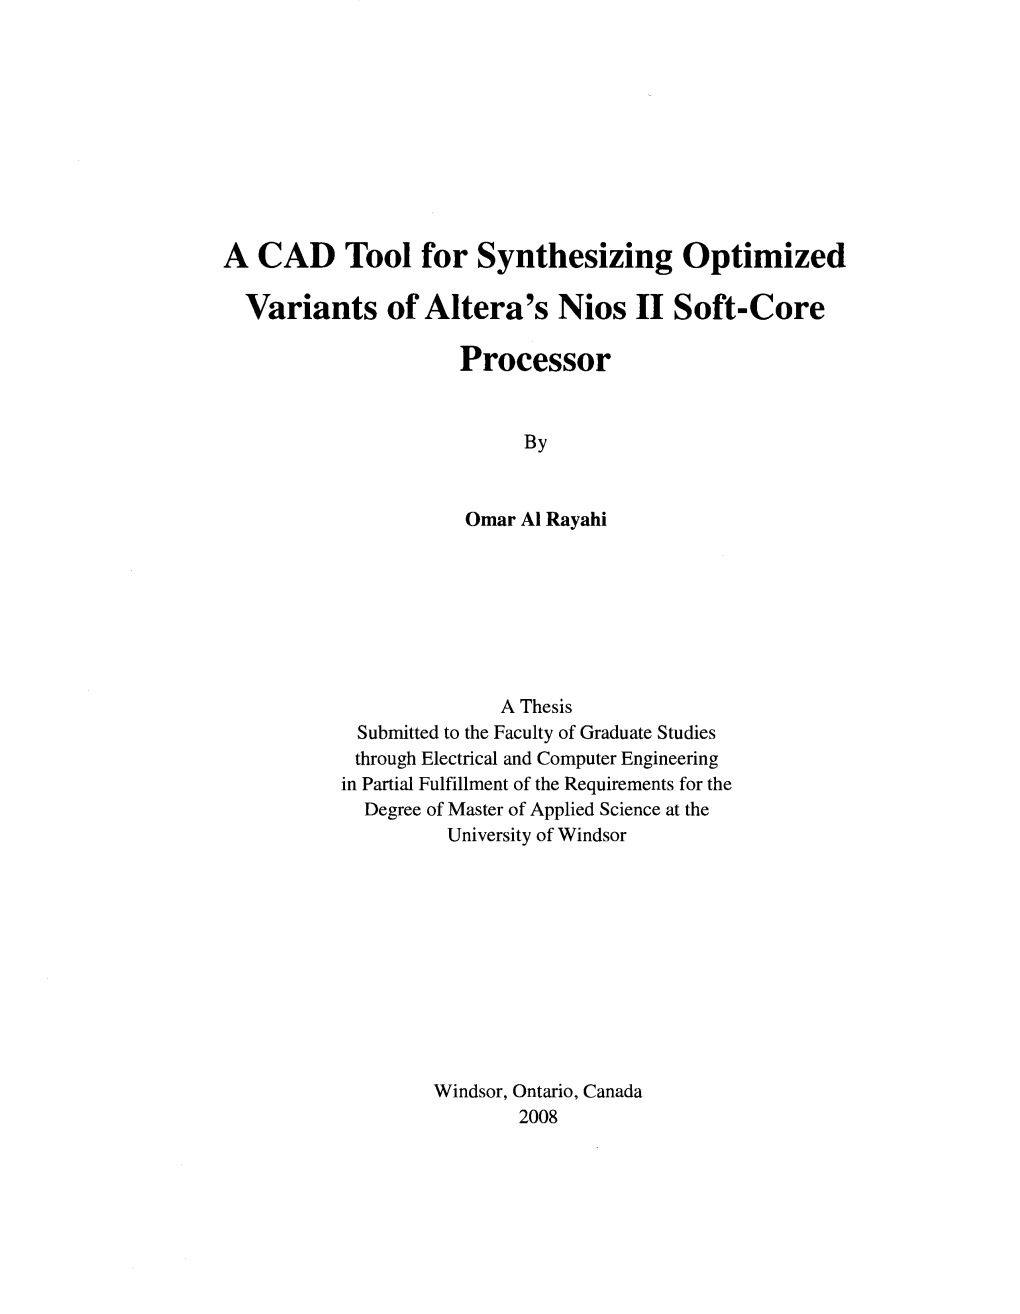 A CAD Tool for Synthesizing Optimized Variants of Altera's Nios II Soft-Core Processor